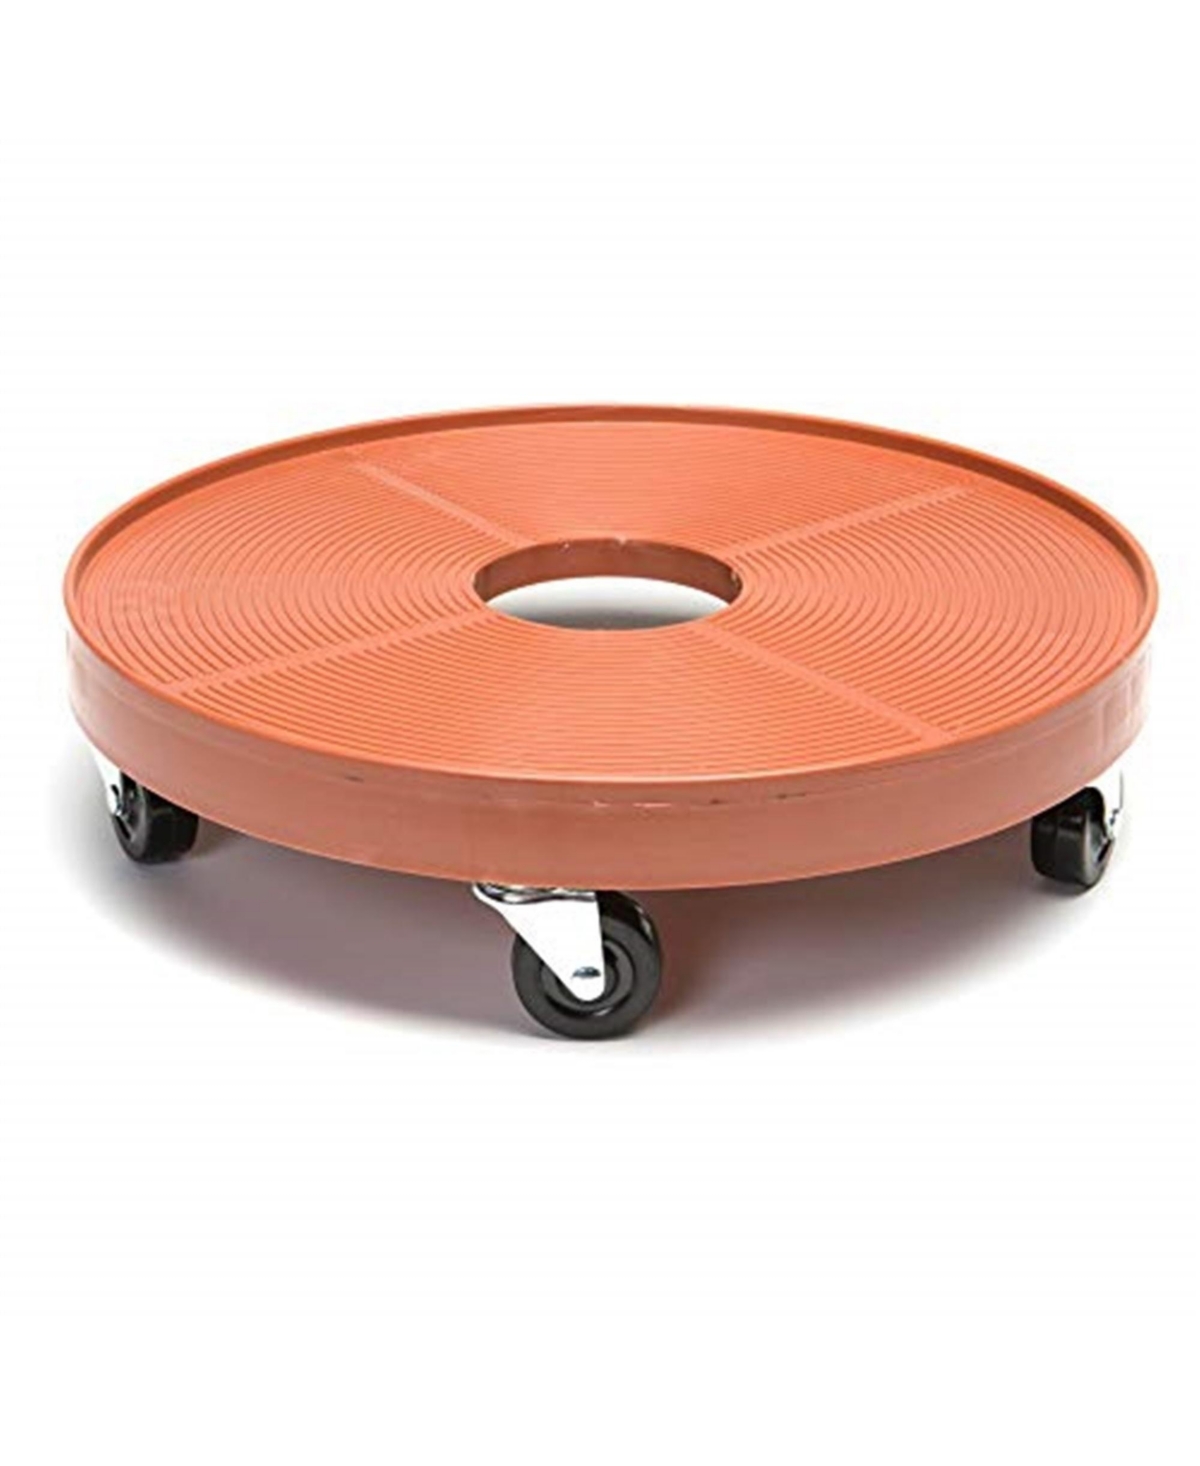 DEV3000P Plant Dolly with Hole Terra Cotta,16 - Terra Cotta